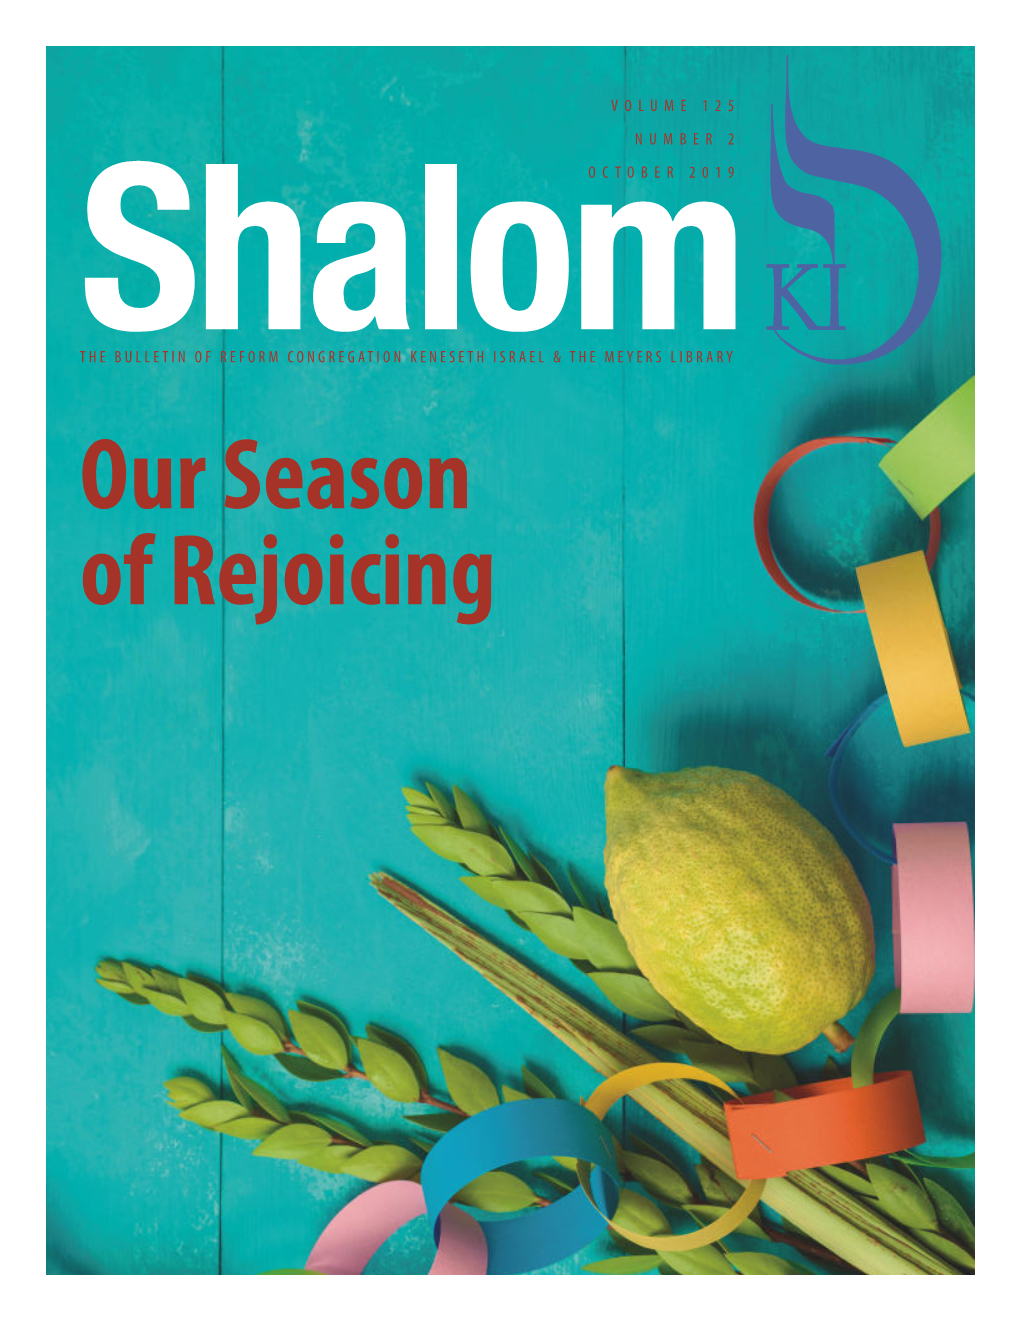 Our Season of Rejoicing